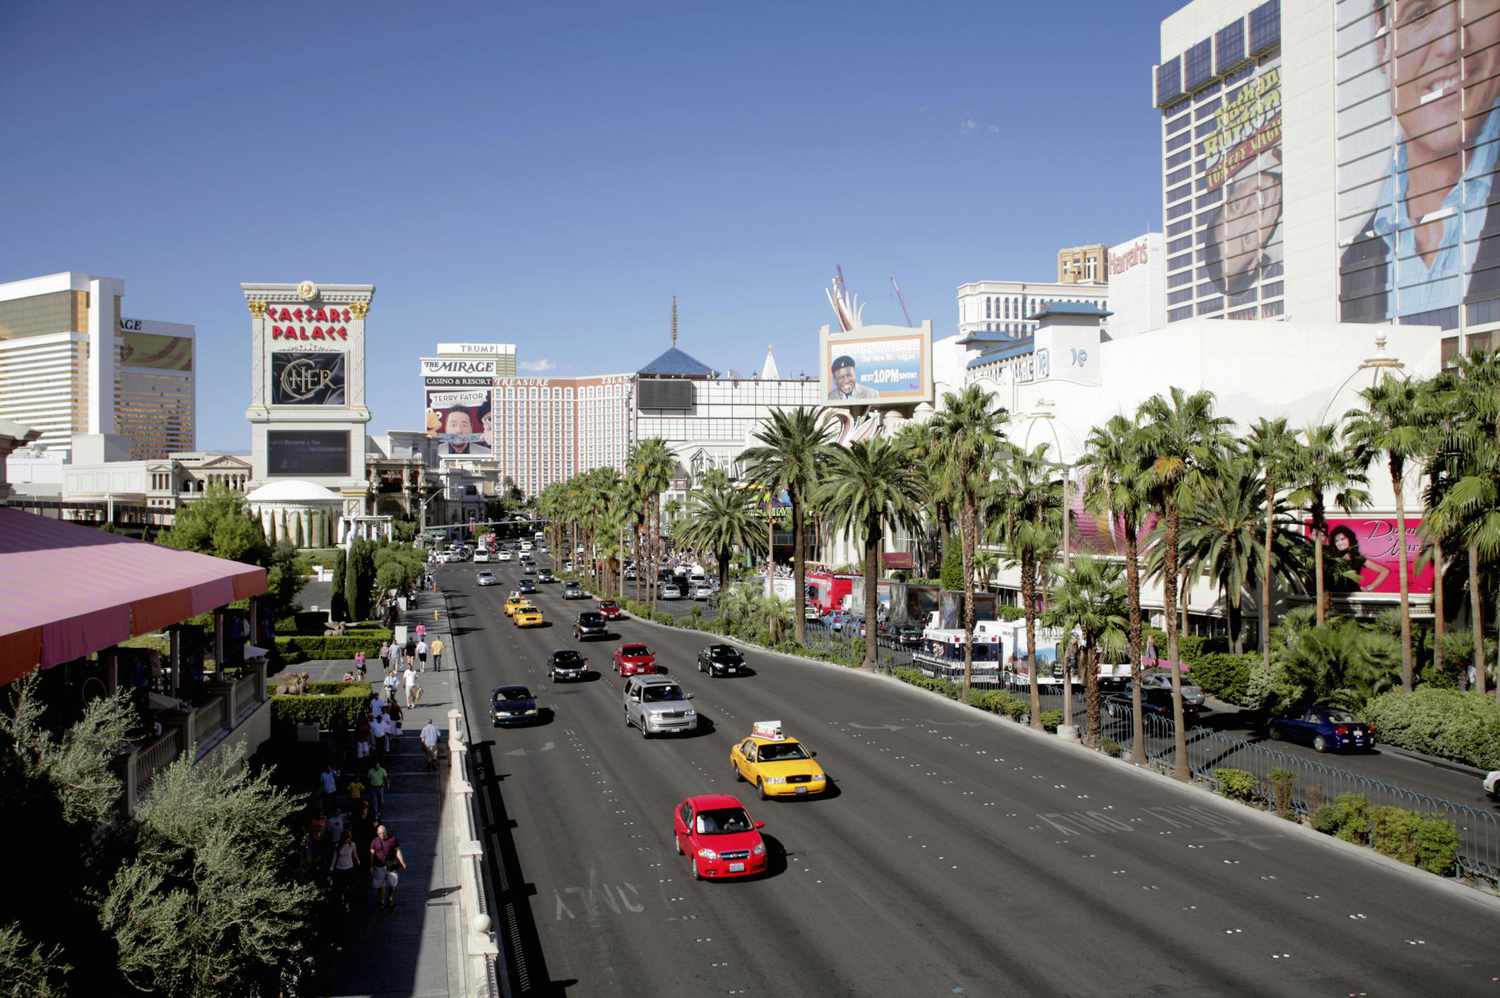 August Weather In Las Vegas: What To Expect